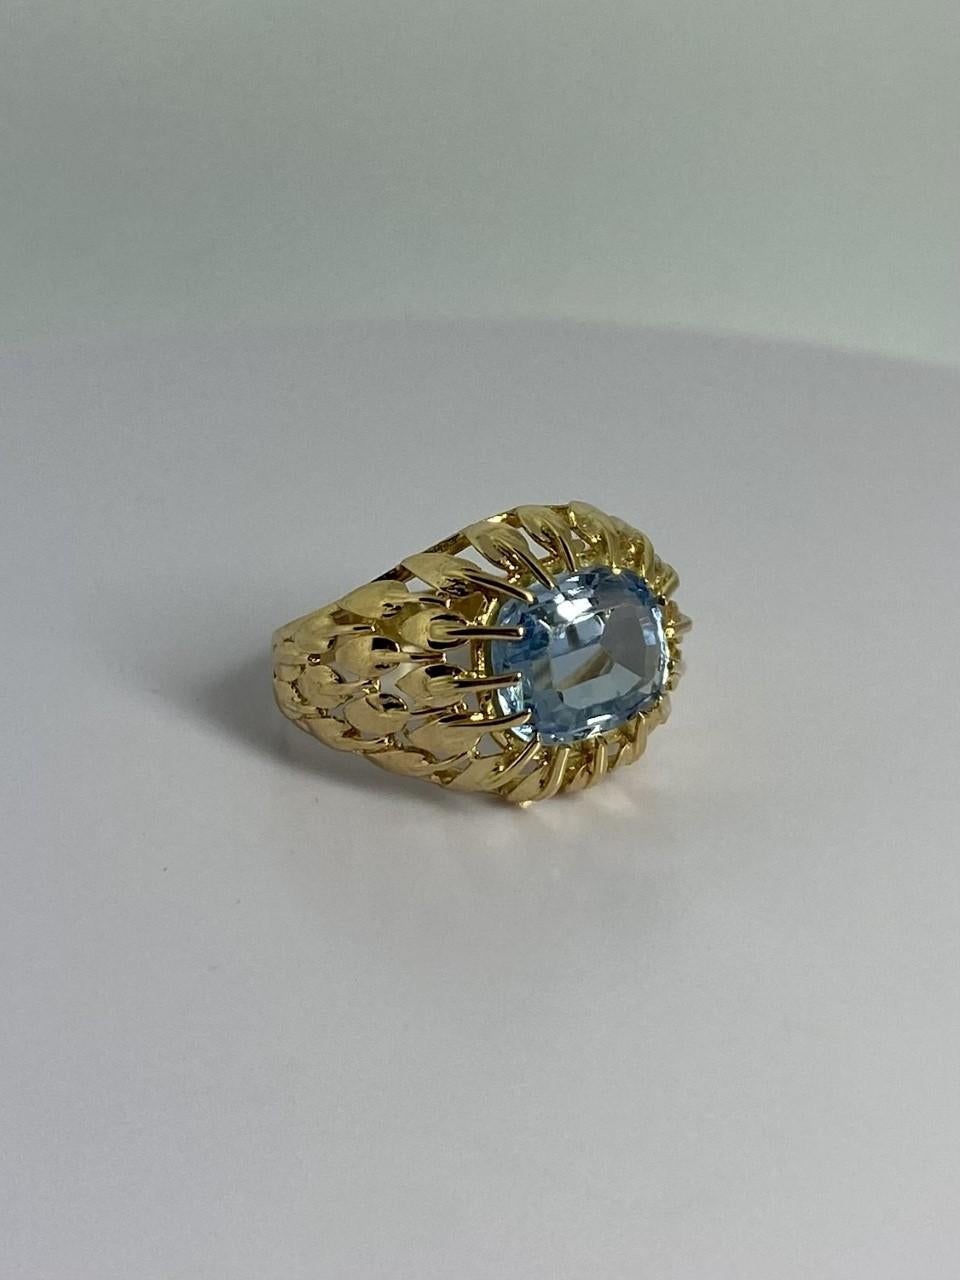 Emerald Cut Ring 18 carat gold with stunning blue spinel with detailed crafted band For Sale